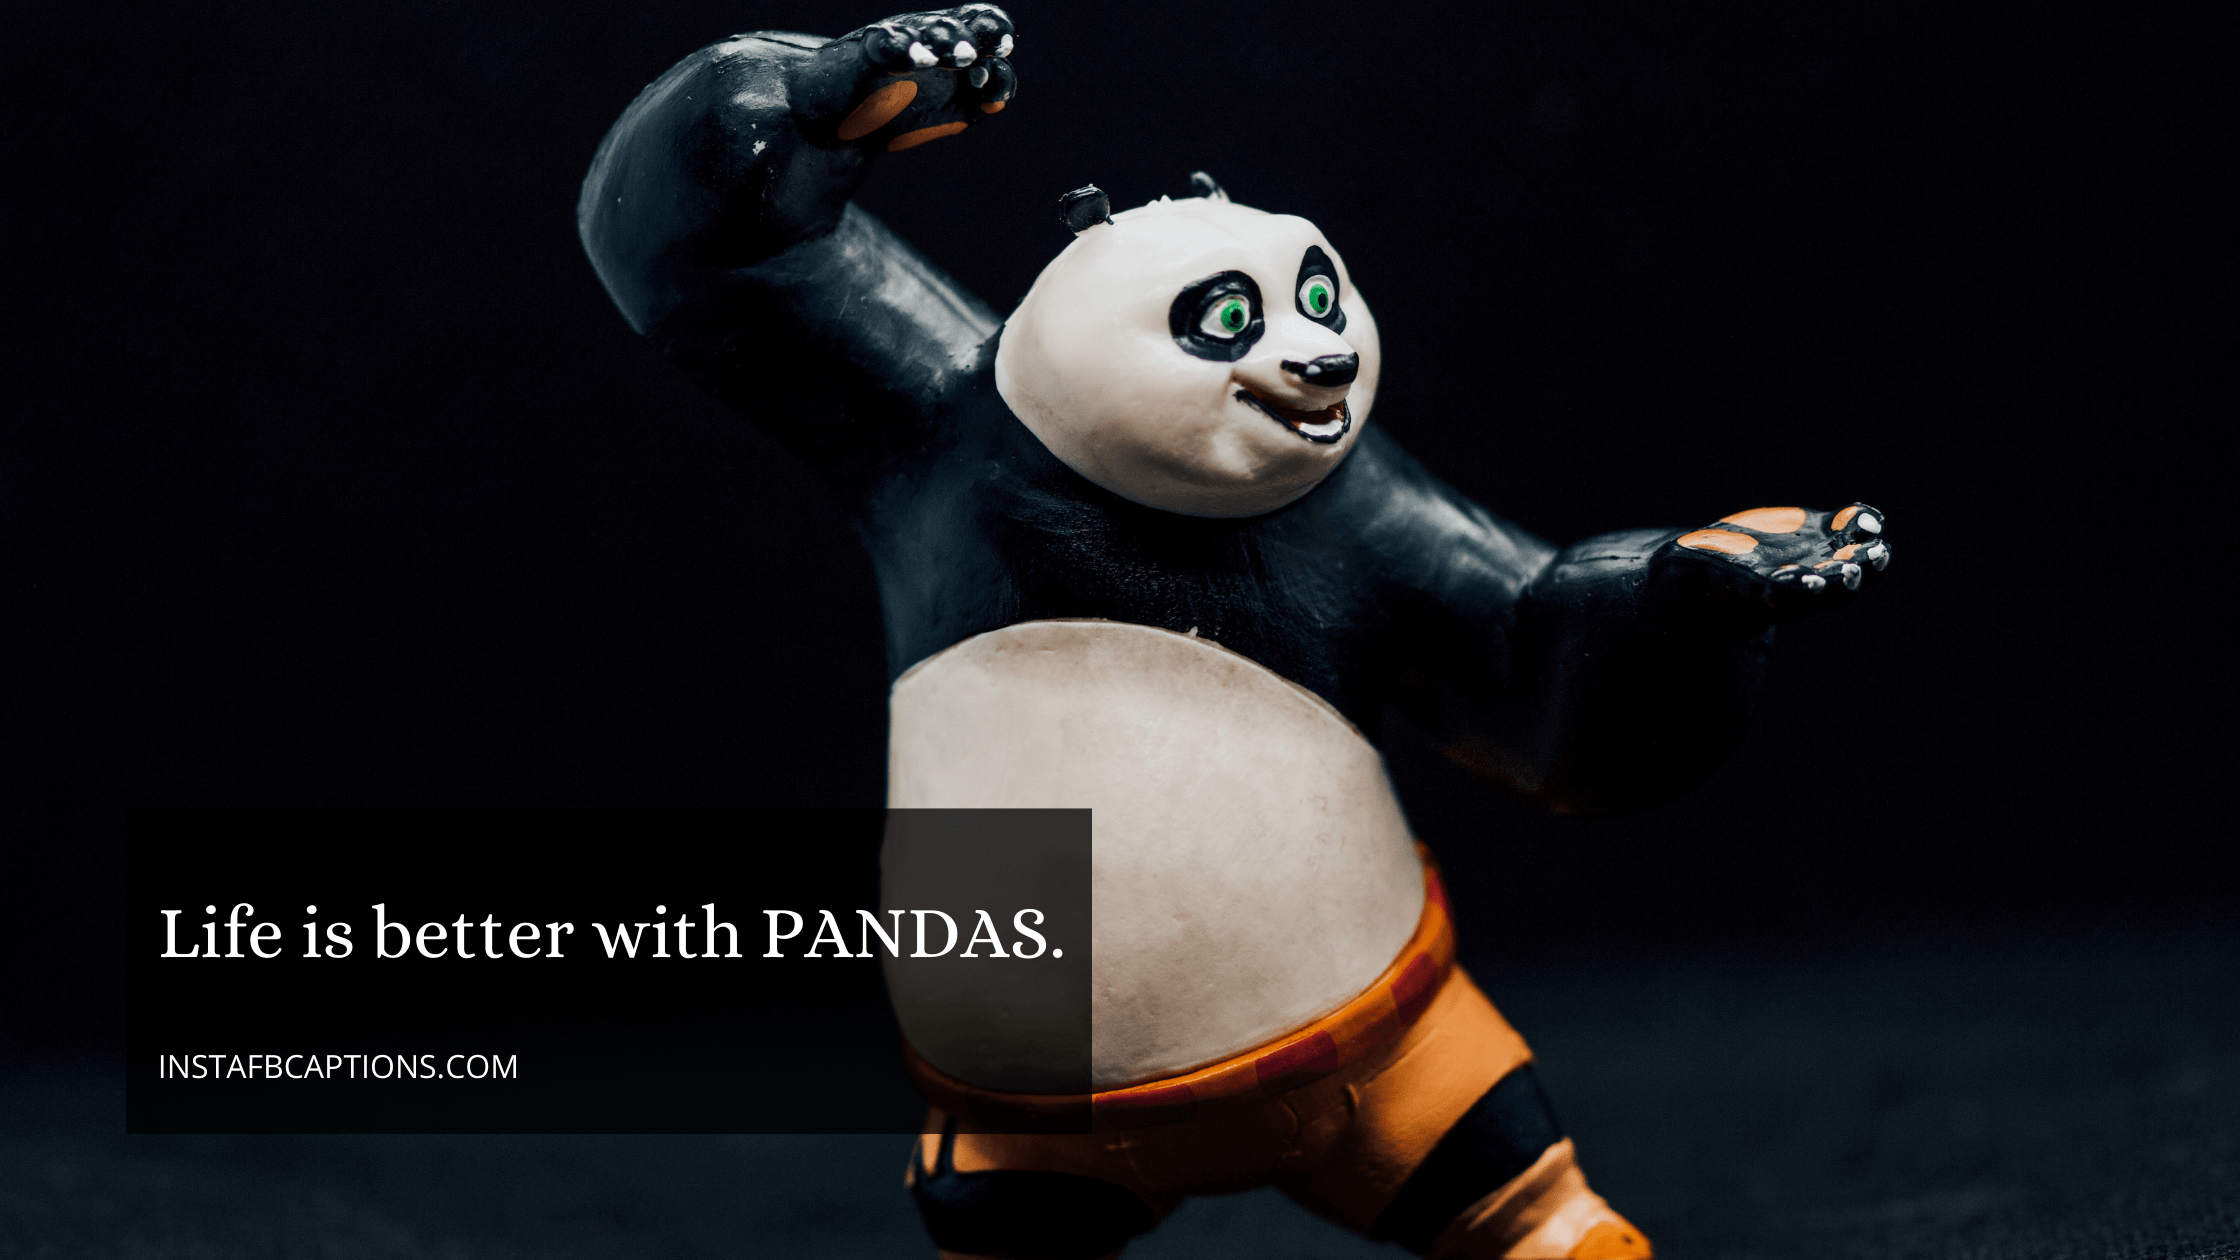 Captions On Kung Fu Panda  - Captions on Kung Fu Panda - Panda Lover Captions for Instagram Pictures in 2022